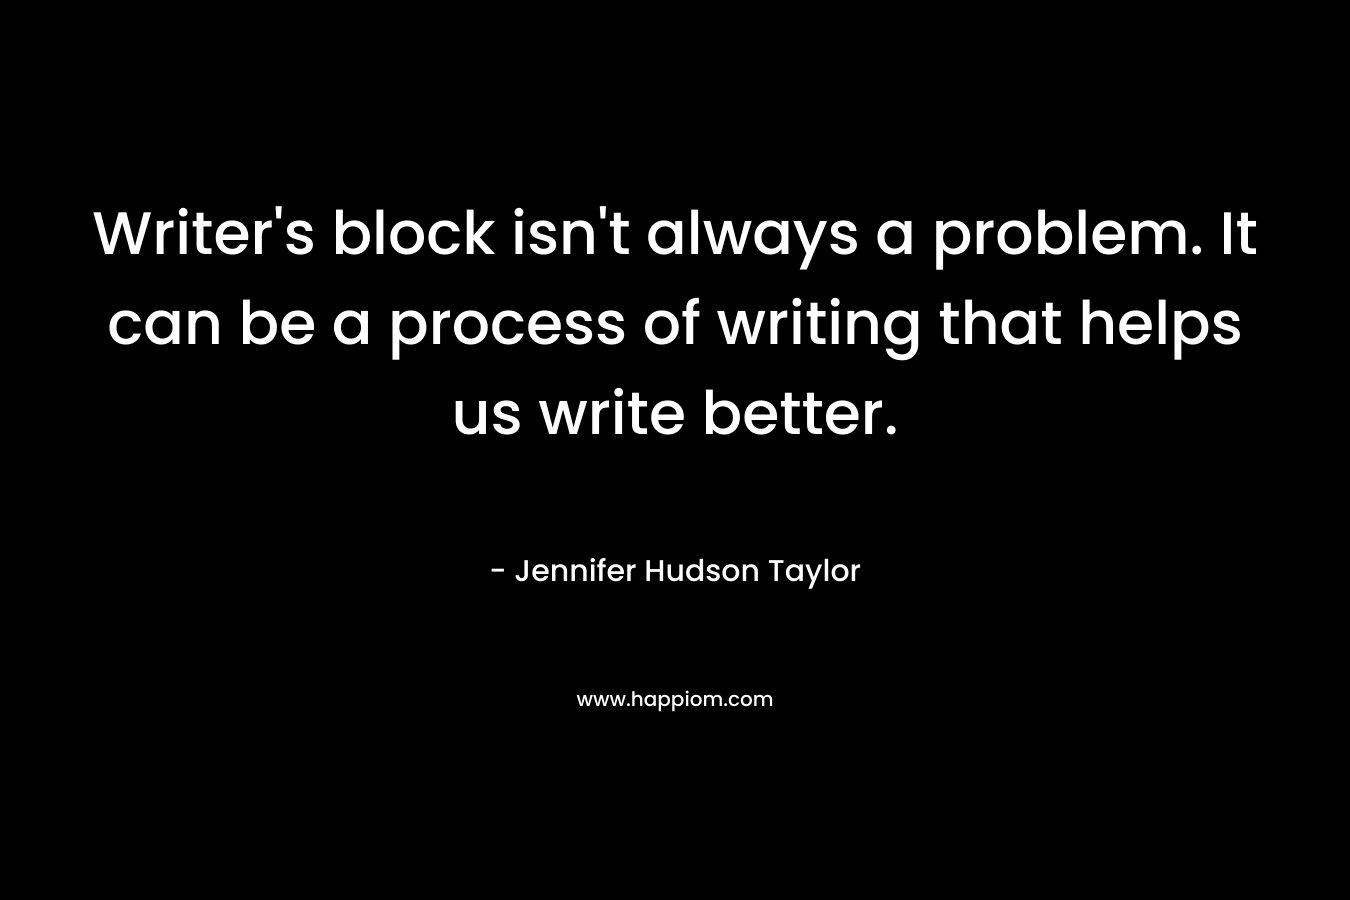 Writer's block isn't always a problem. It can be a process of writing that helps us write better.